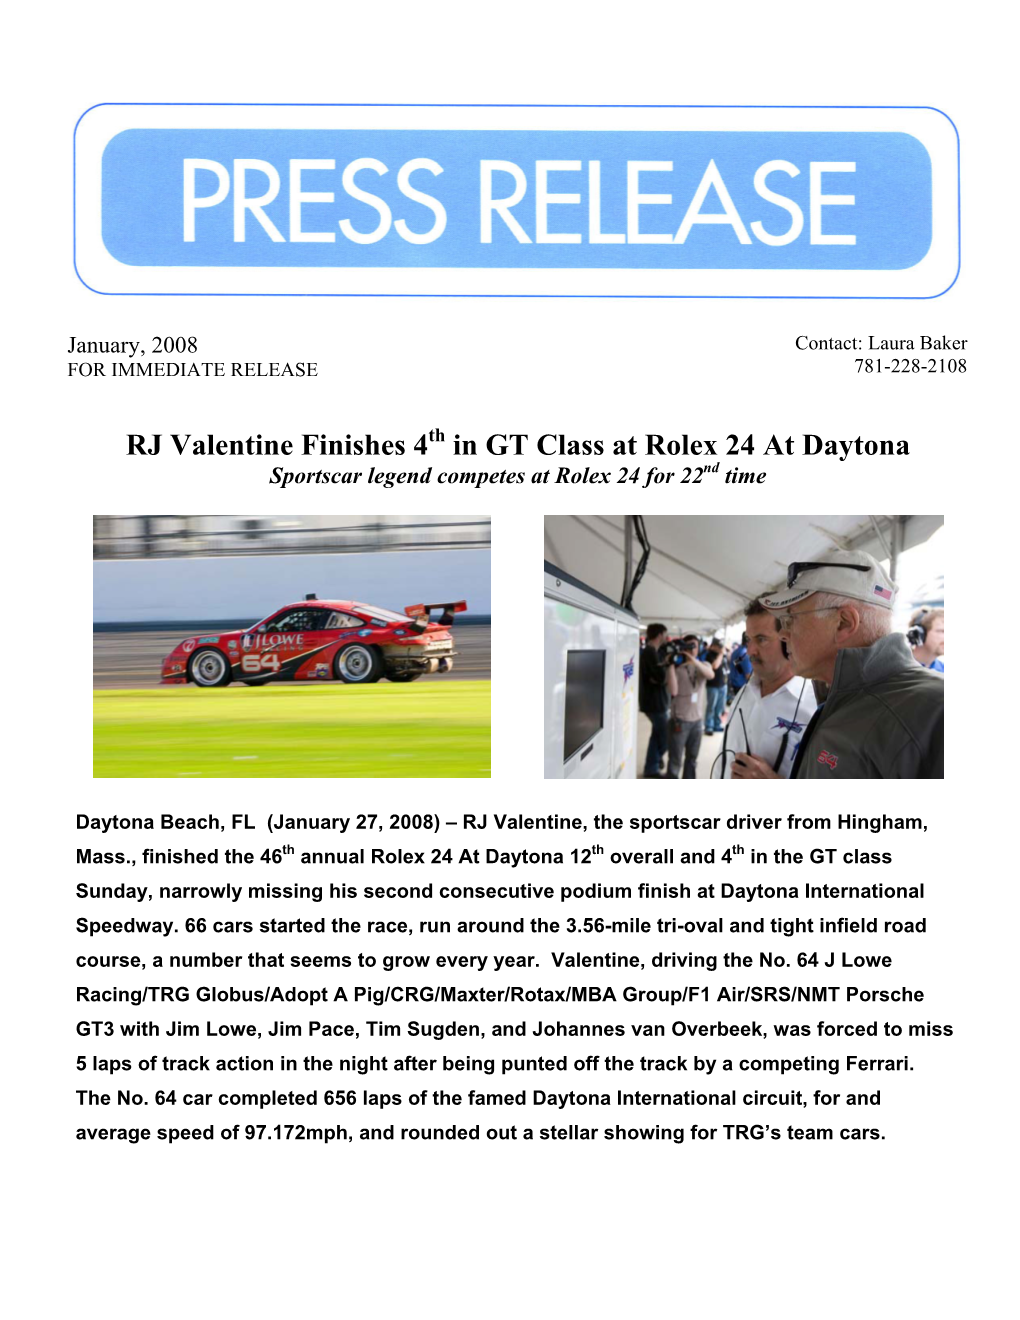 NEWS from F1 BOSTON